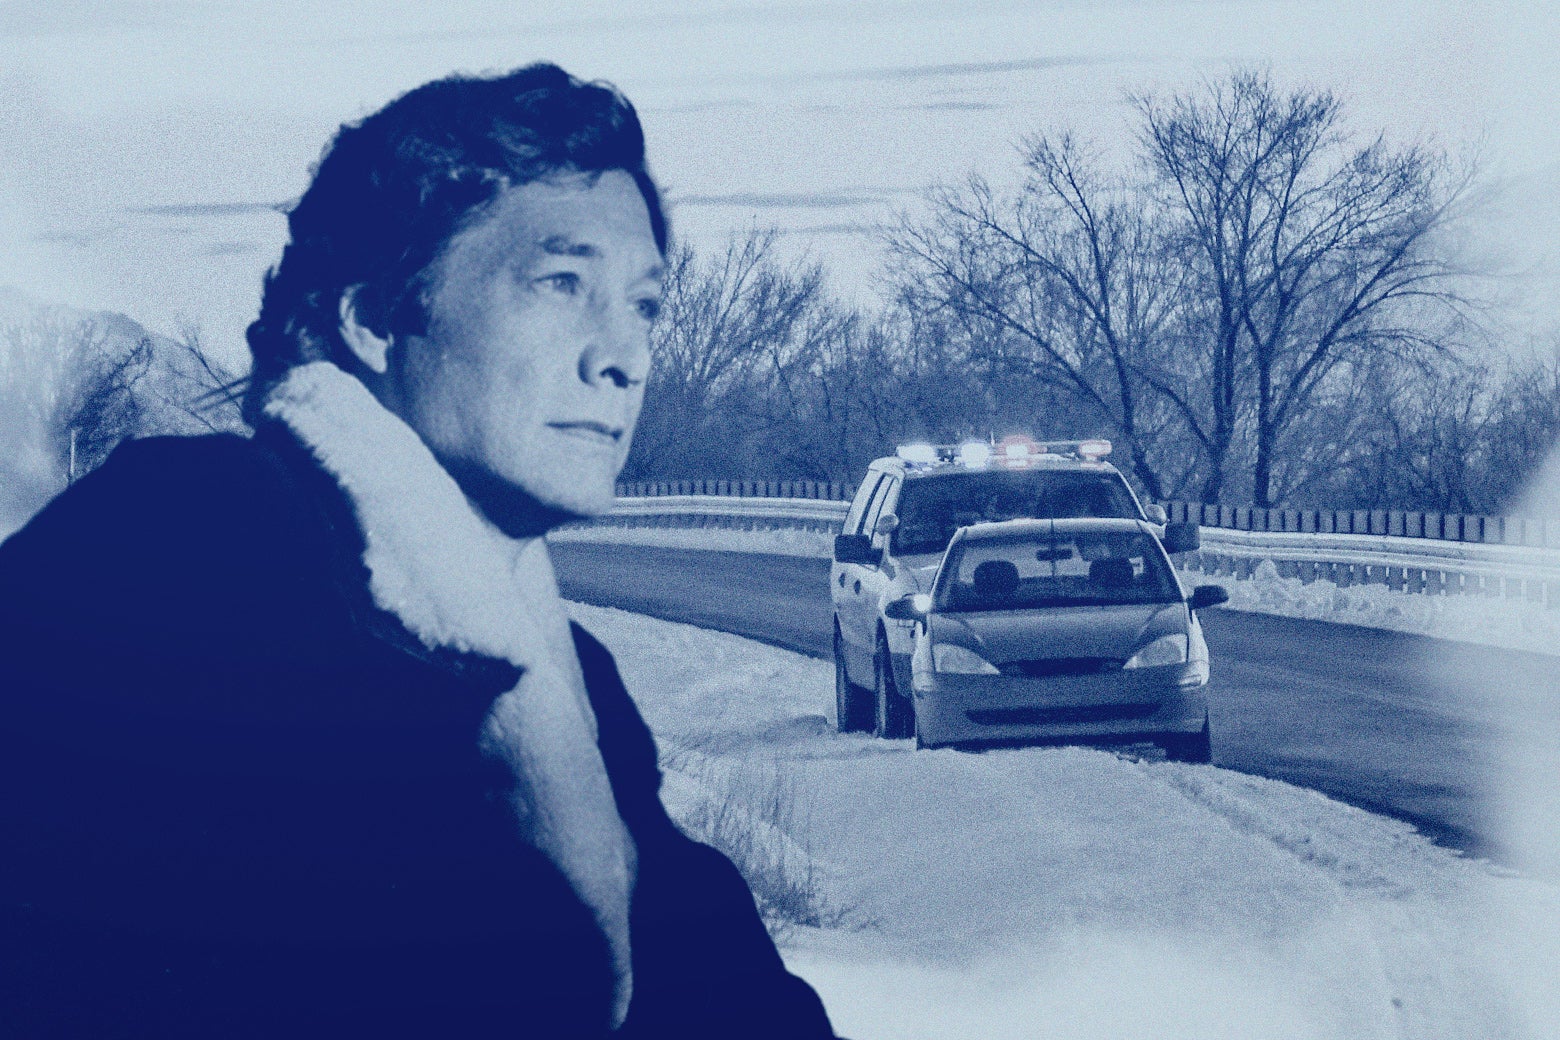 A blue-tinged image of white novelist Richard North Patterson, wearing a wool coat, staring ahead, while in the background, a police car, its lights on, pulls over a sedan during a snowy winter day.